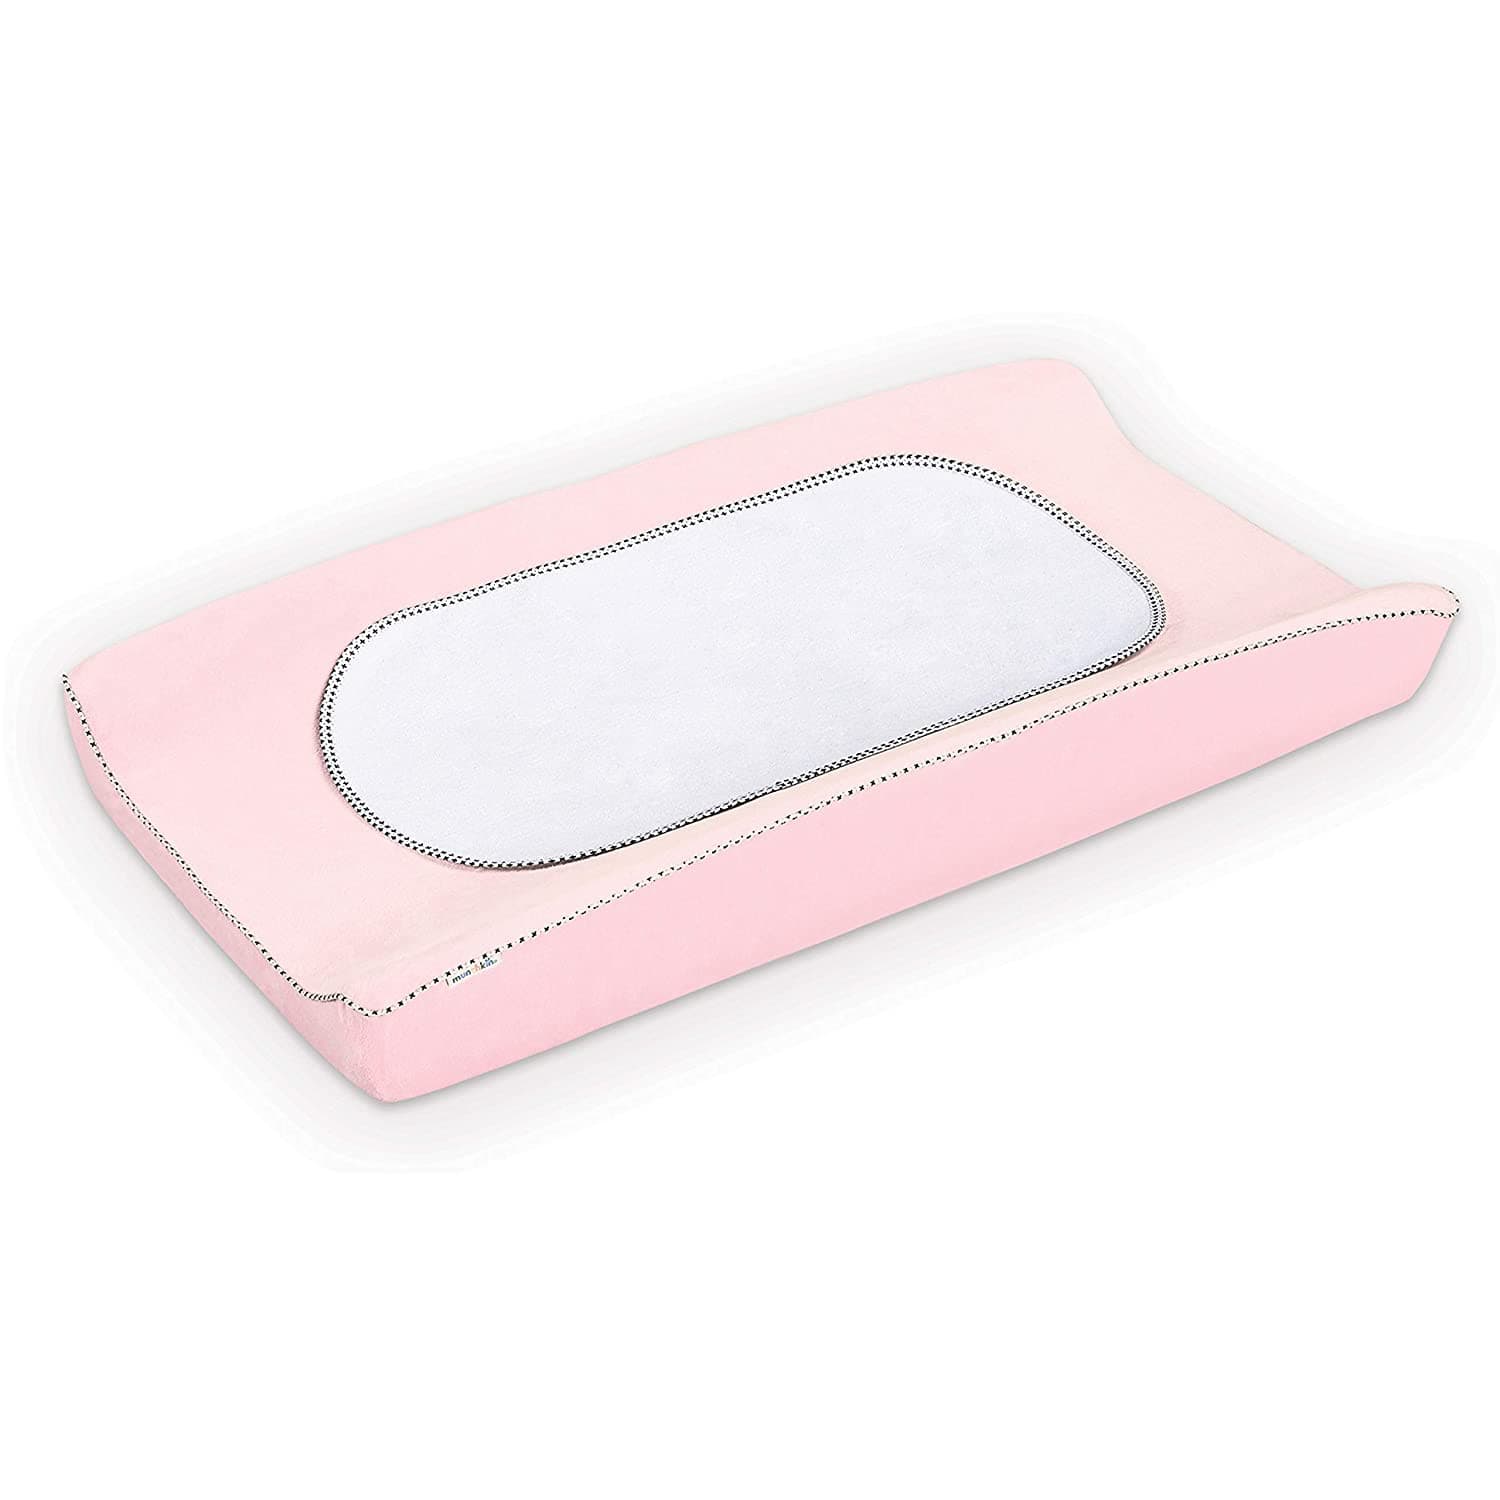 Waterproof Changing Pad Liners, 3 Count.